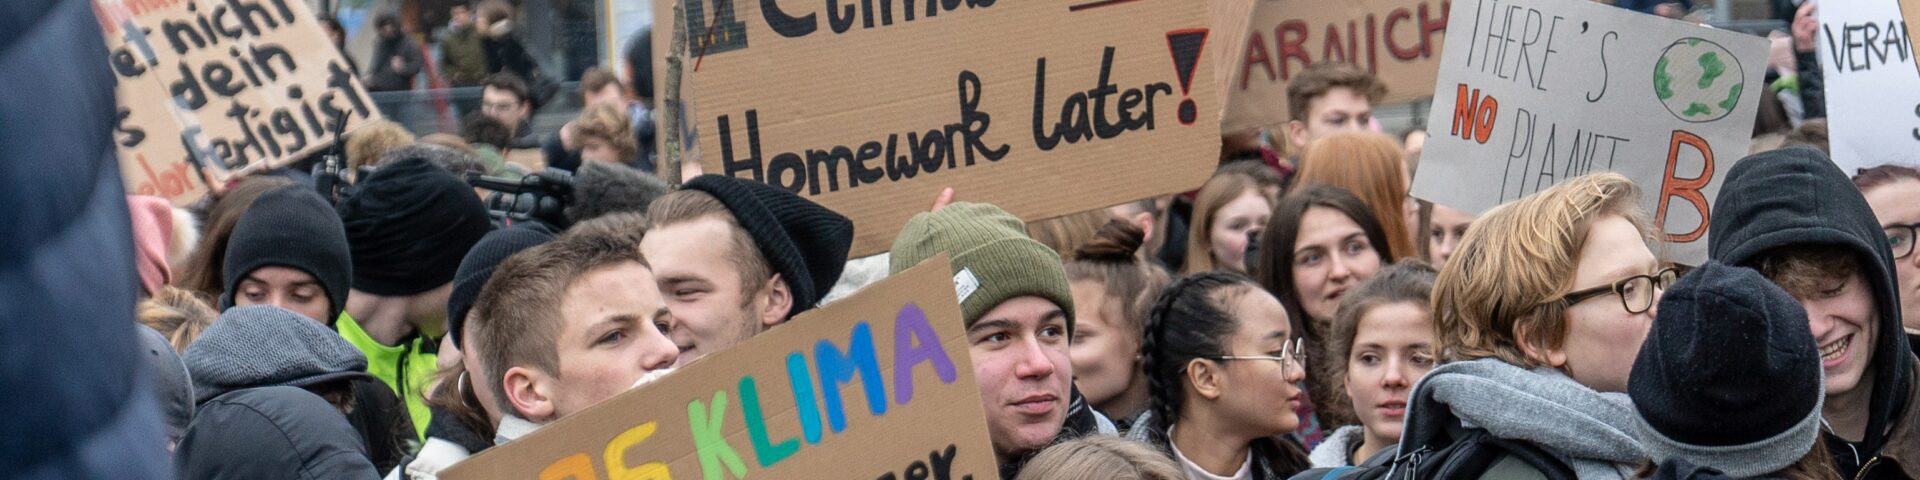 A climate march event